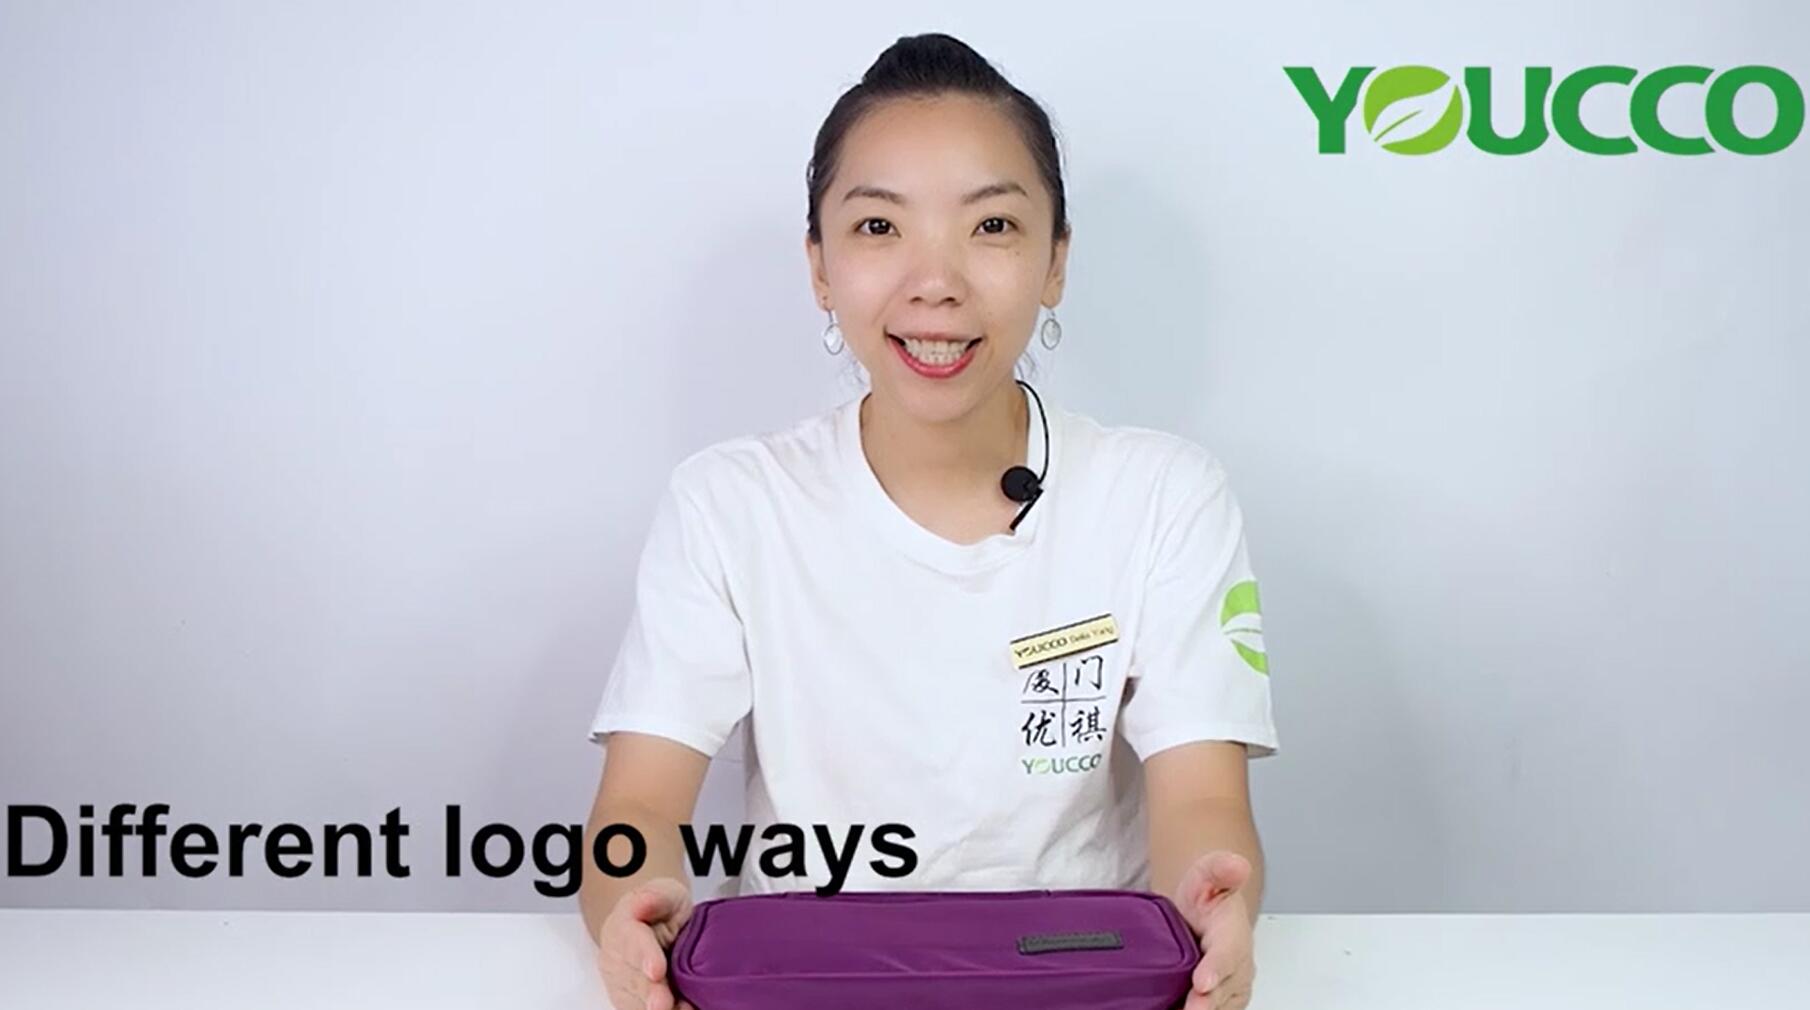 Several common ways of customized logo